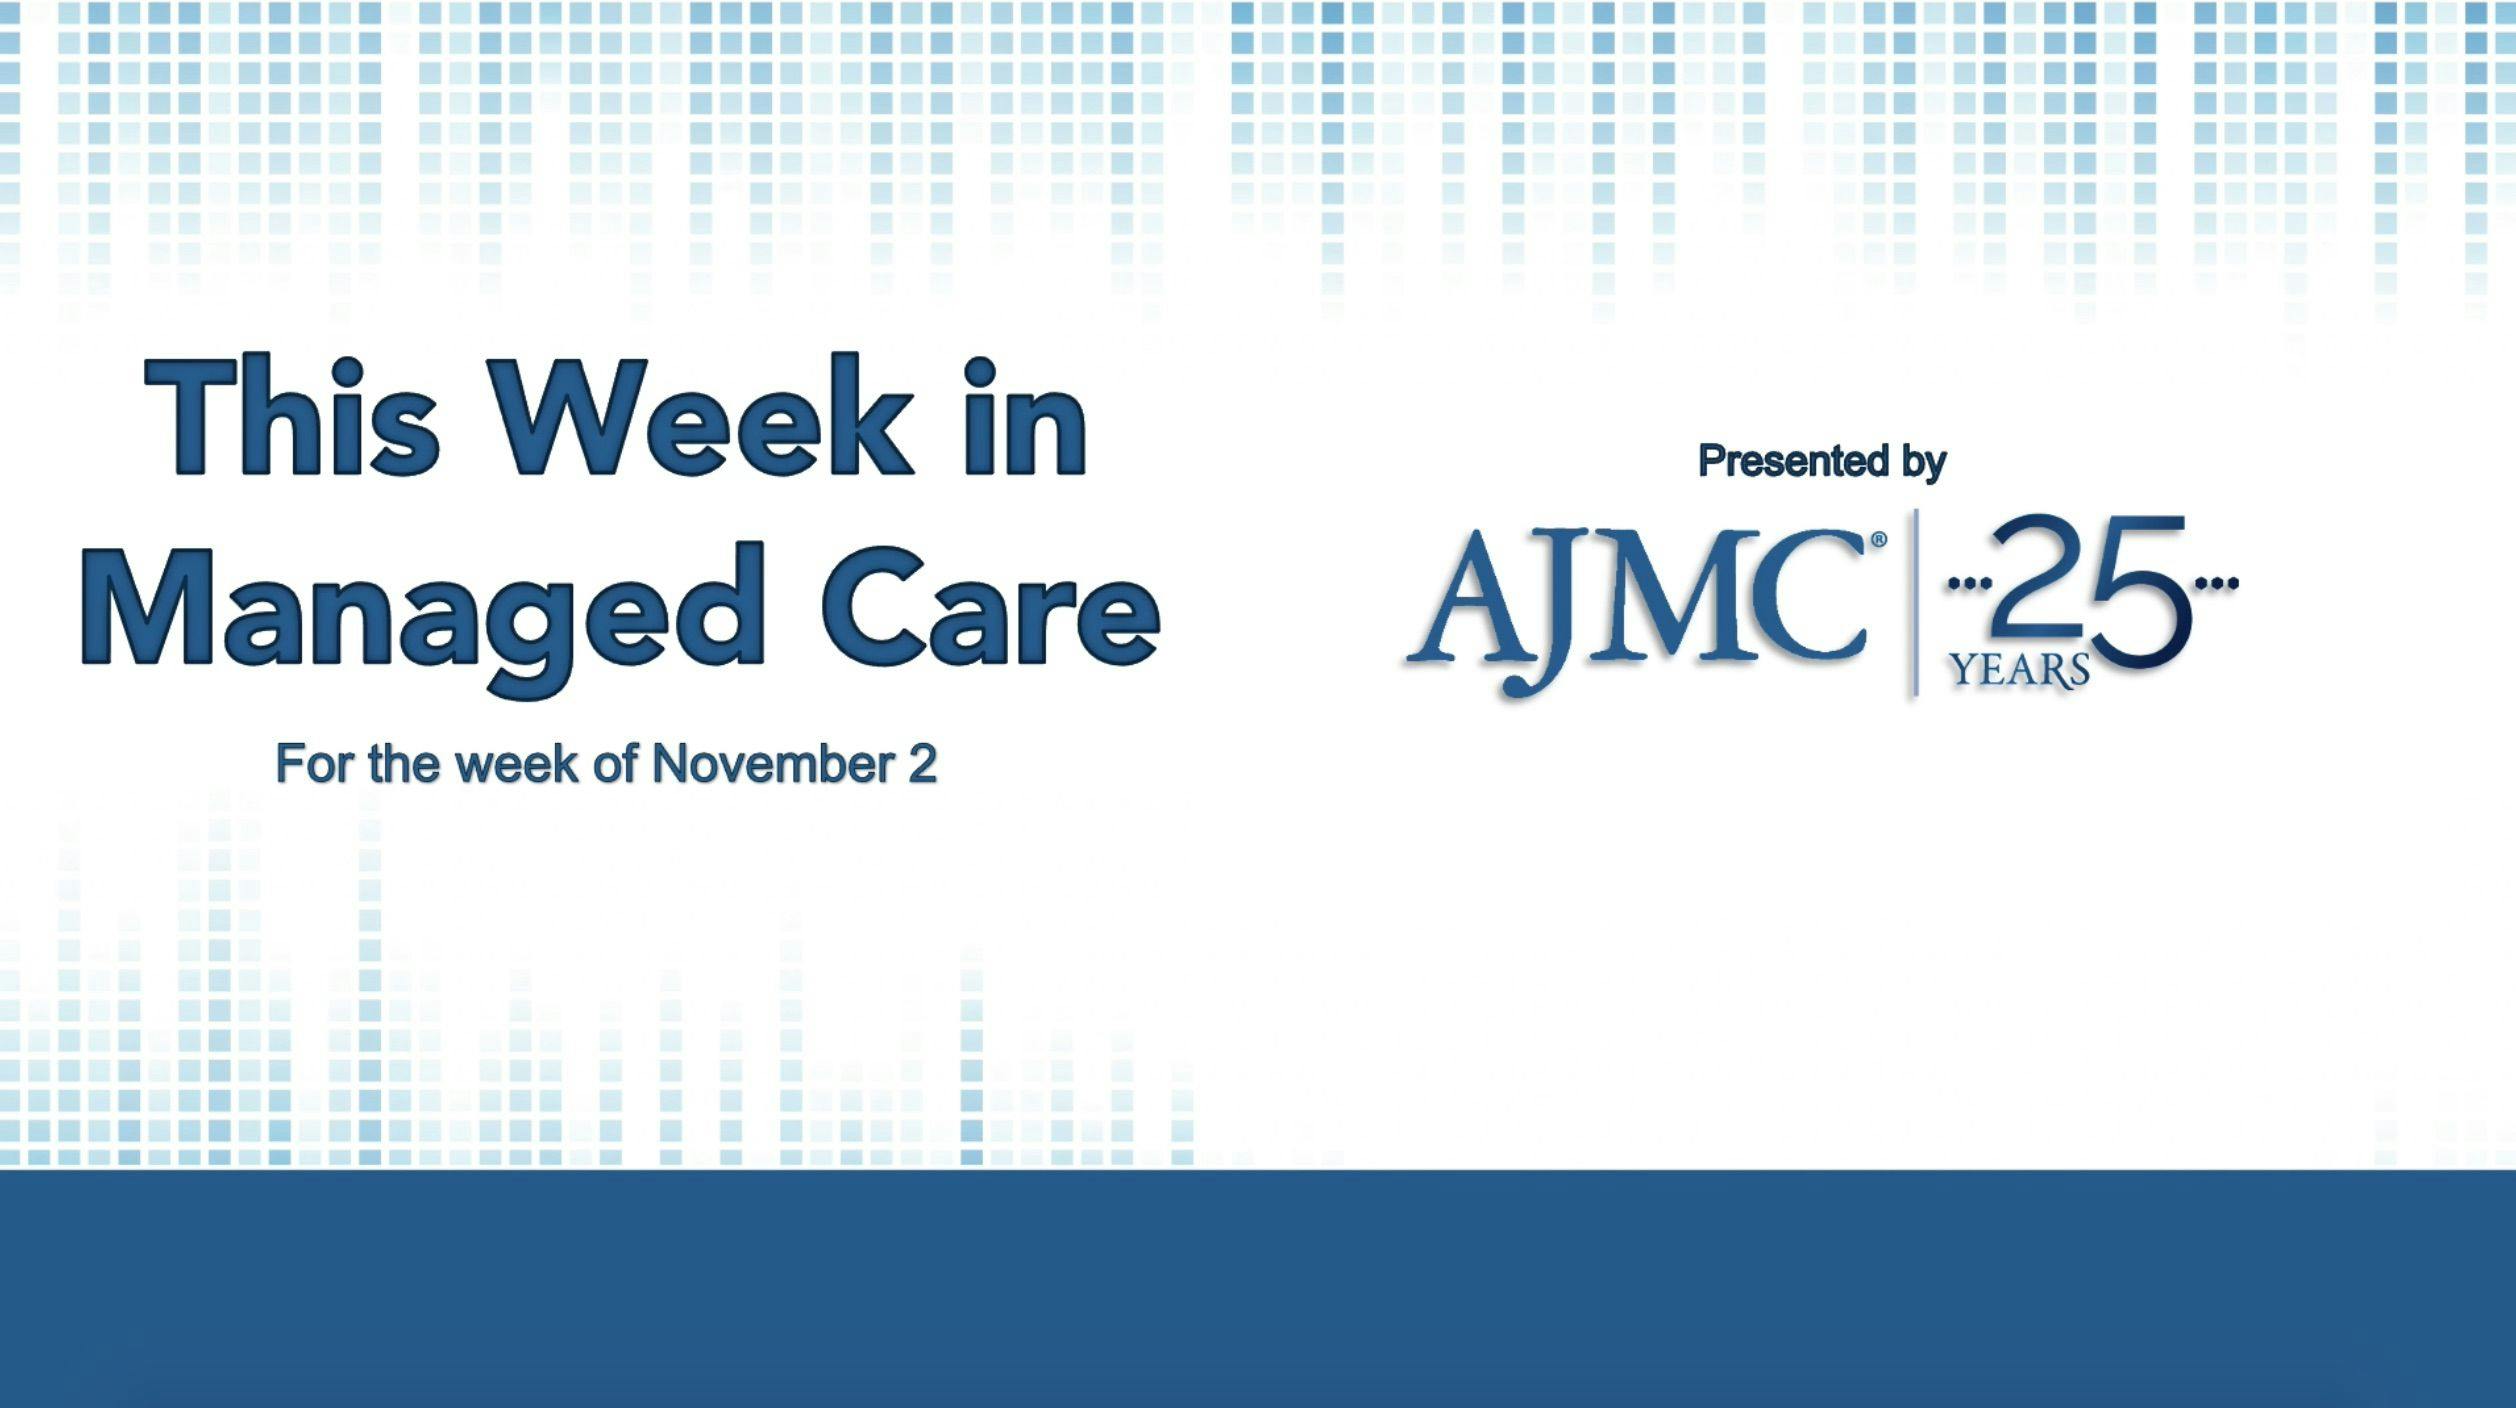 This Week in Managed Care: November 6, 2020